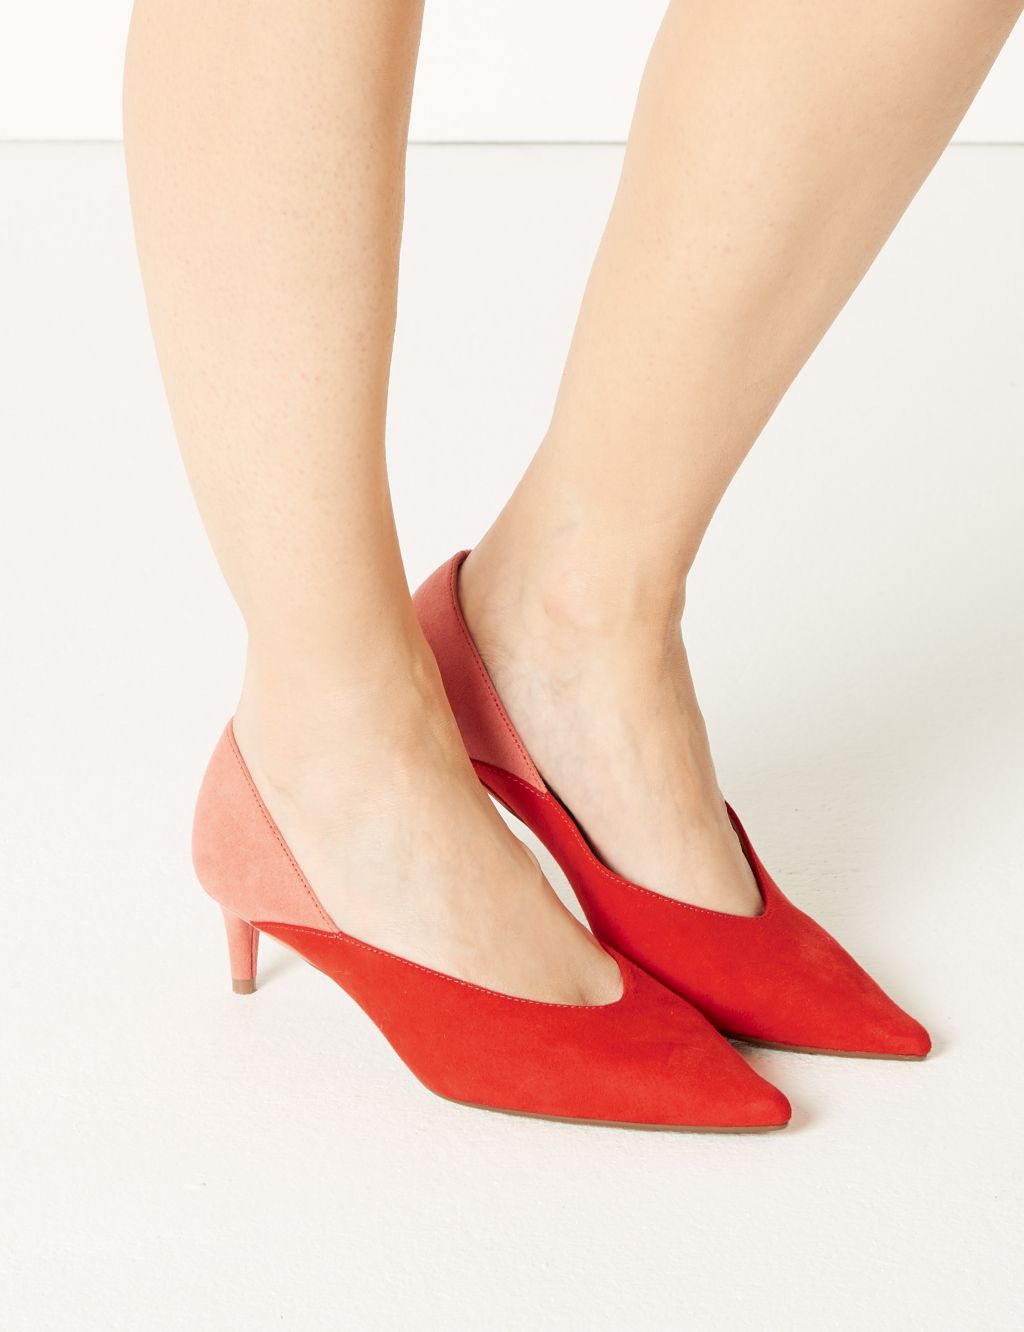 10 Best Red Heels To Buy In 2023 (Reviews, Prices & Photos)